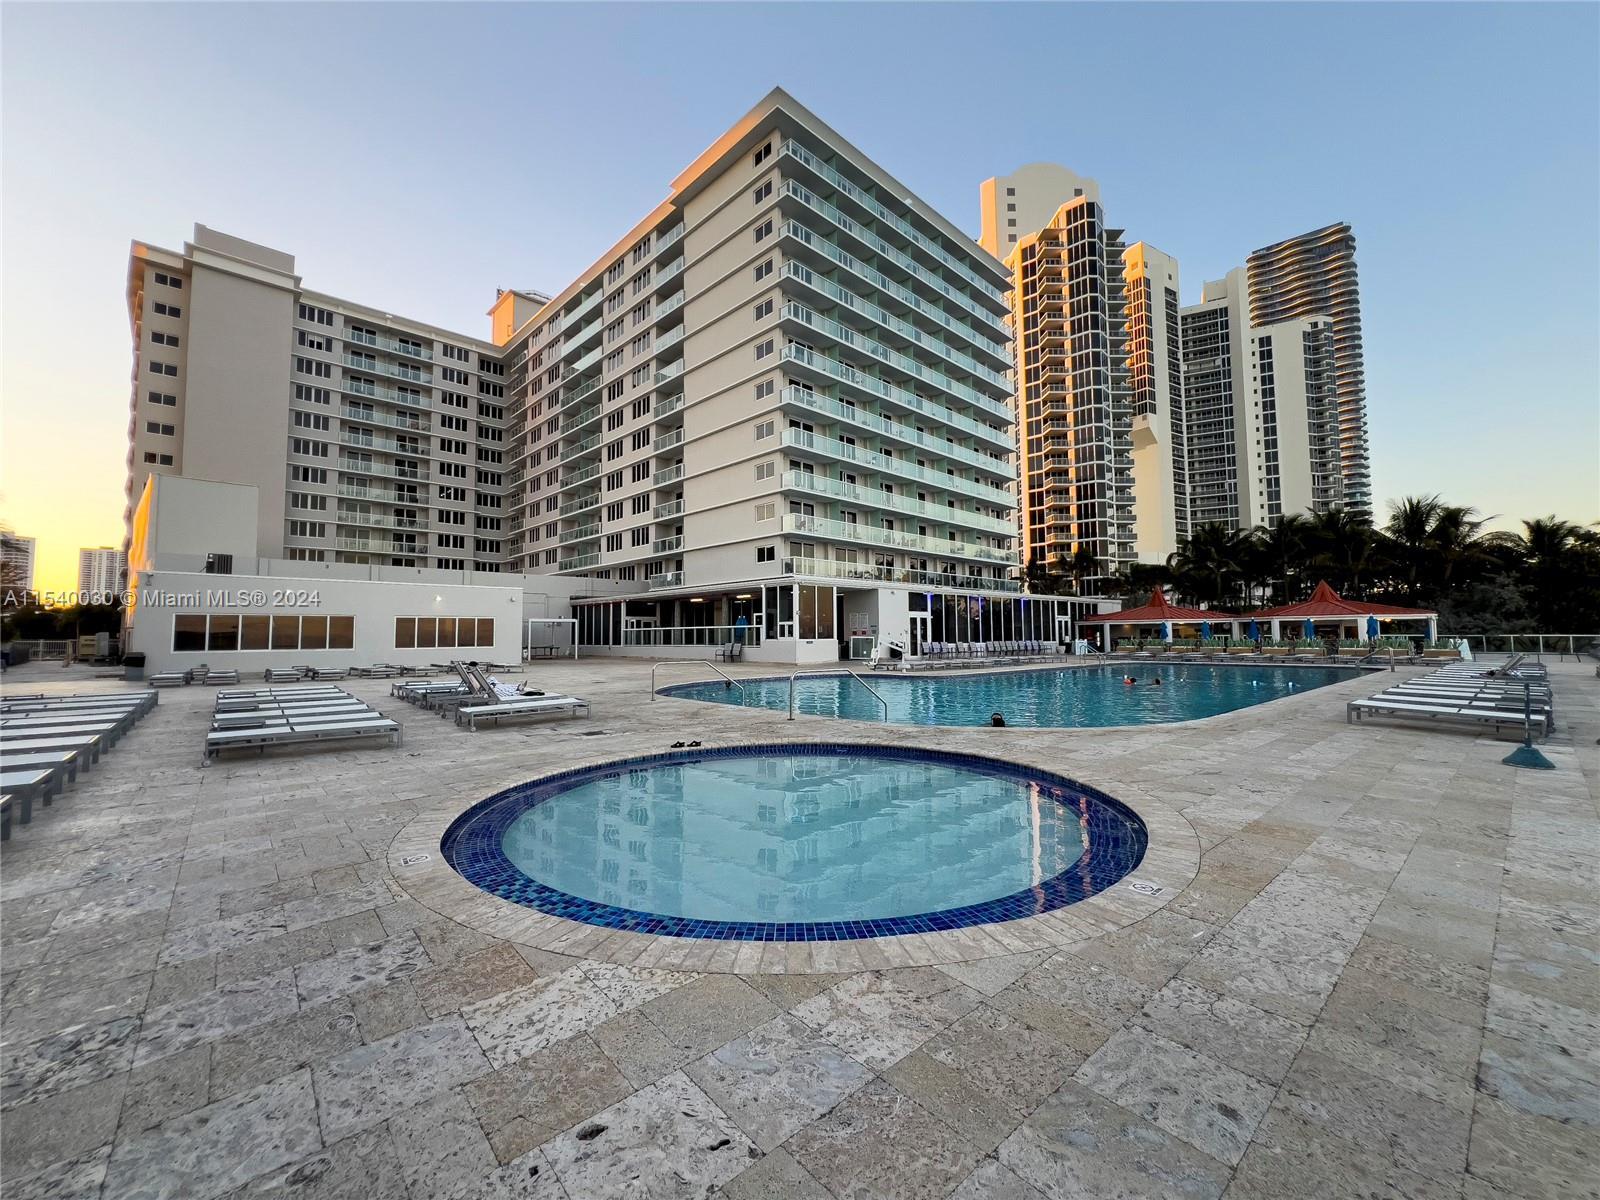 Located in Sunny Isles Beach, this light and bright studio offers stunning views and beach access fo